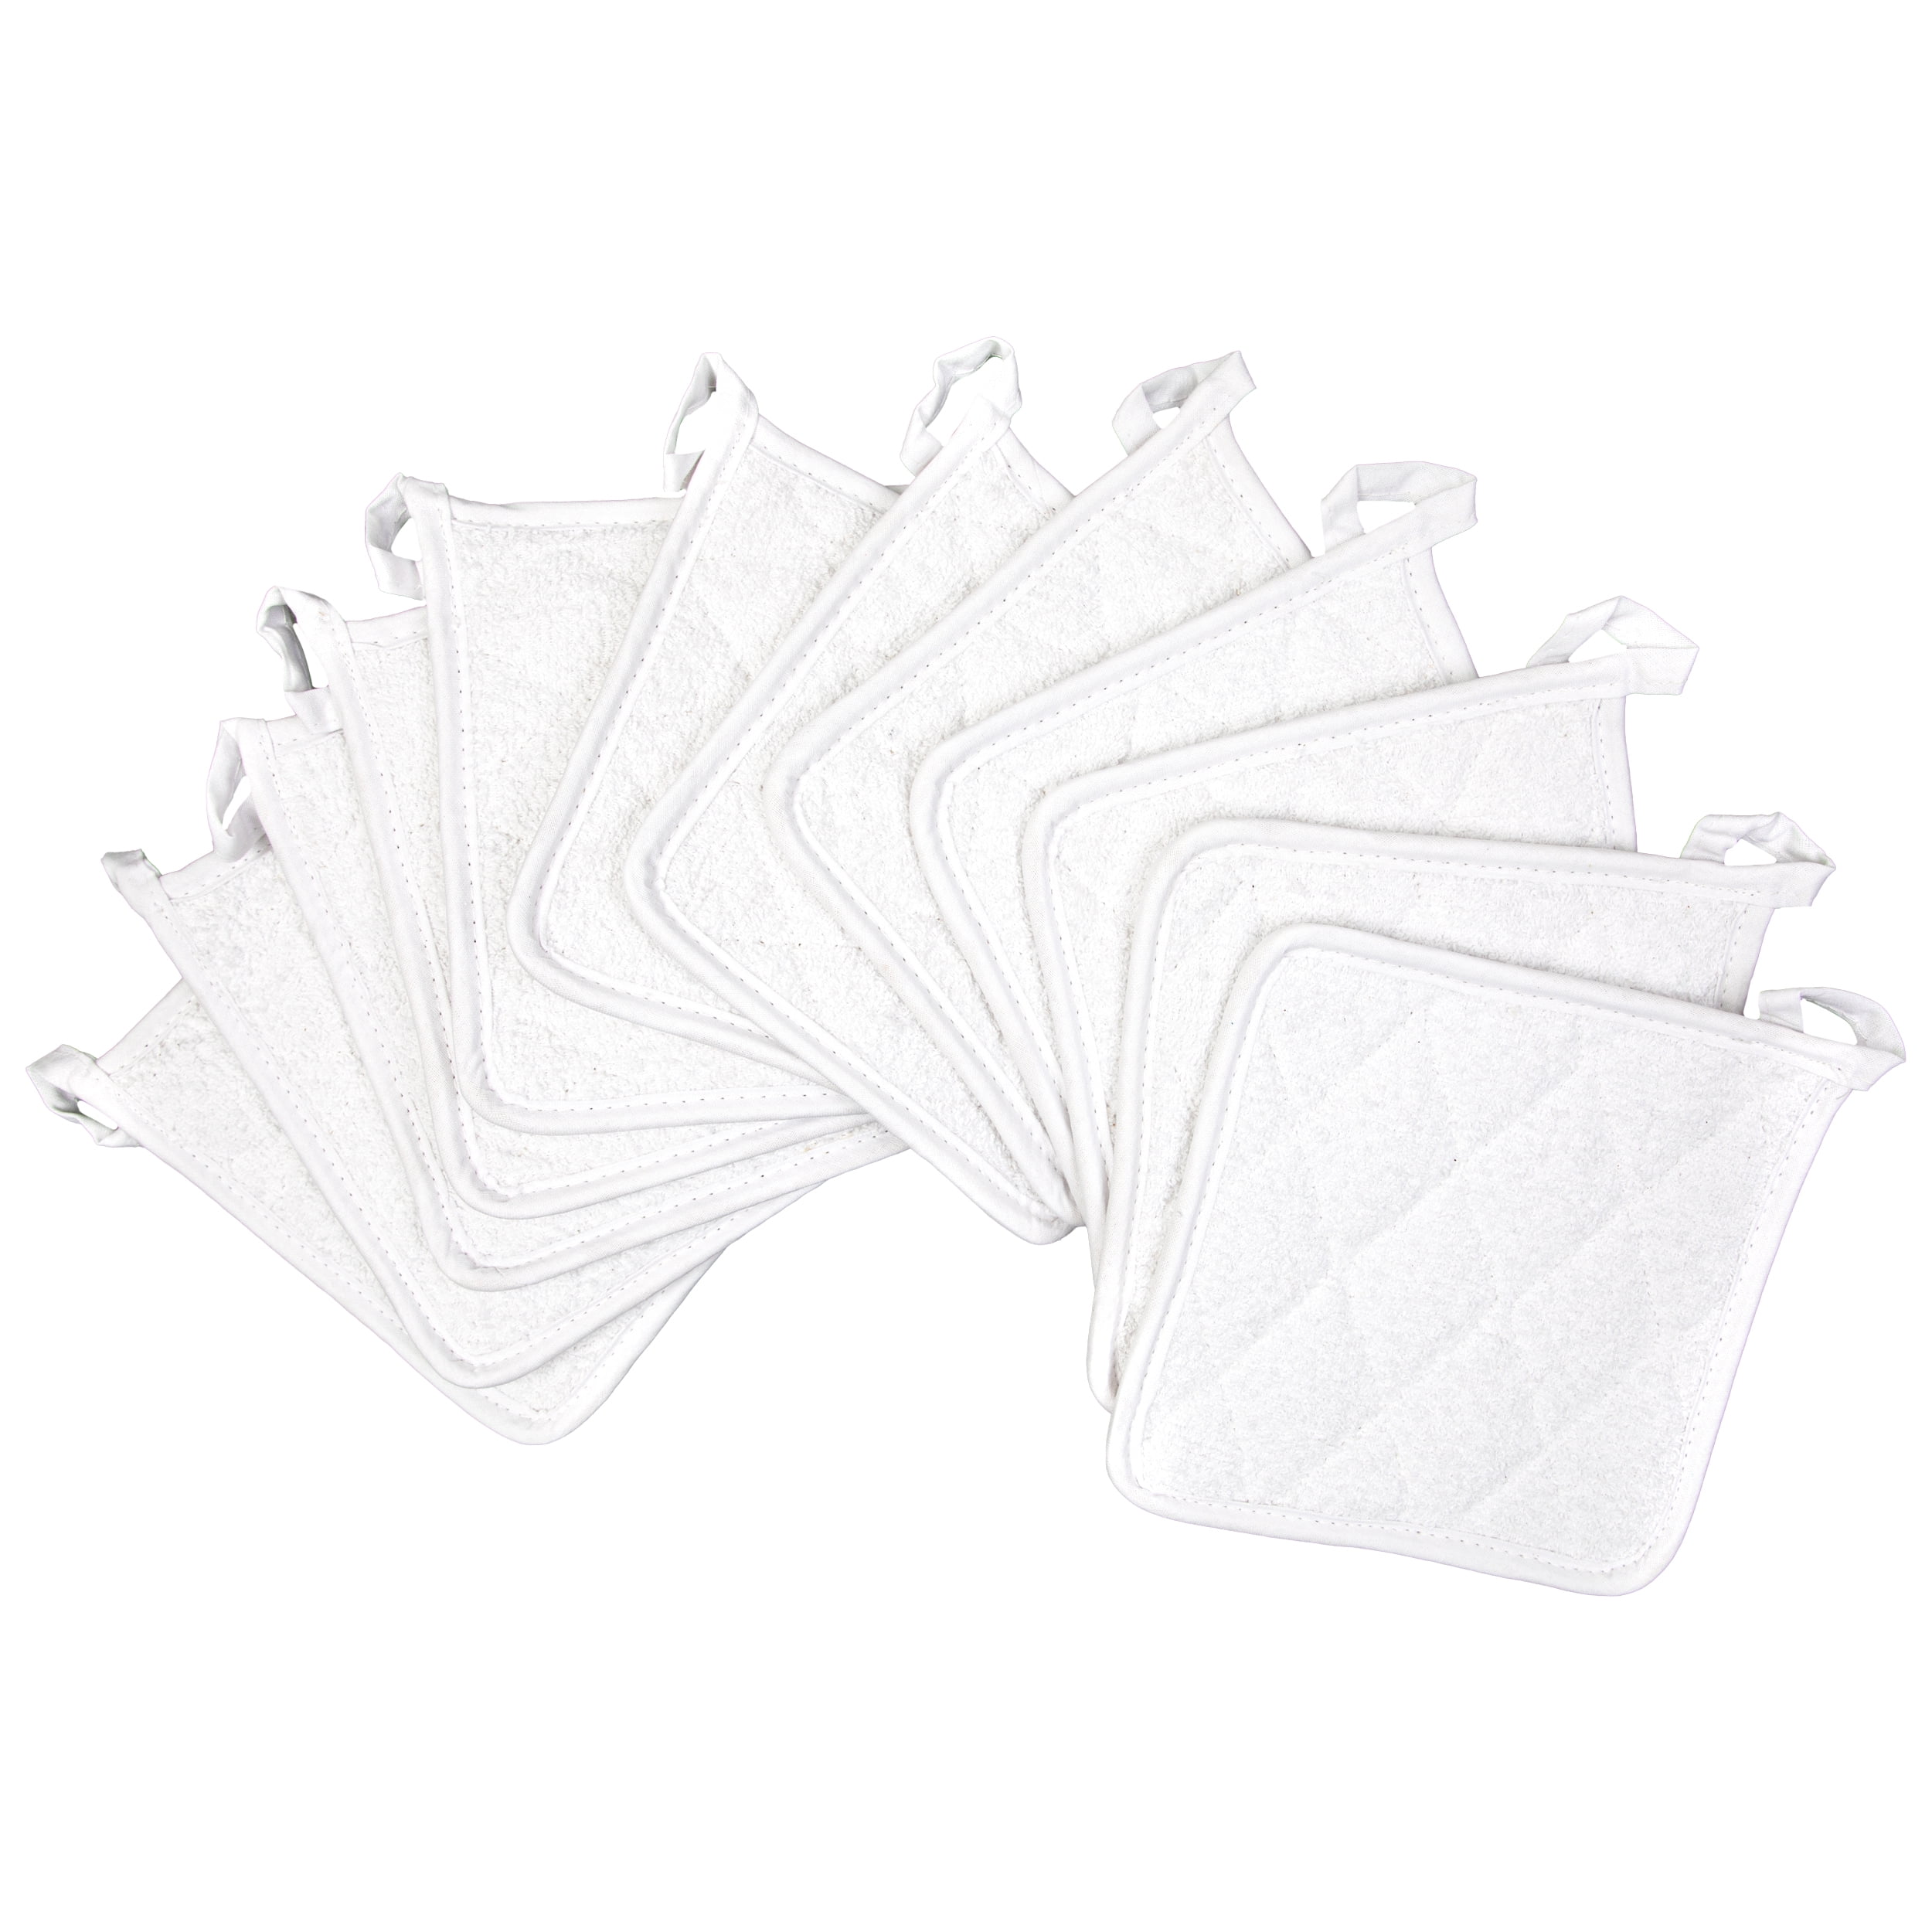 Arkwright Kitchen Pot Holders (Pack of 12), Cotton, 7x7, White